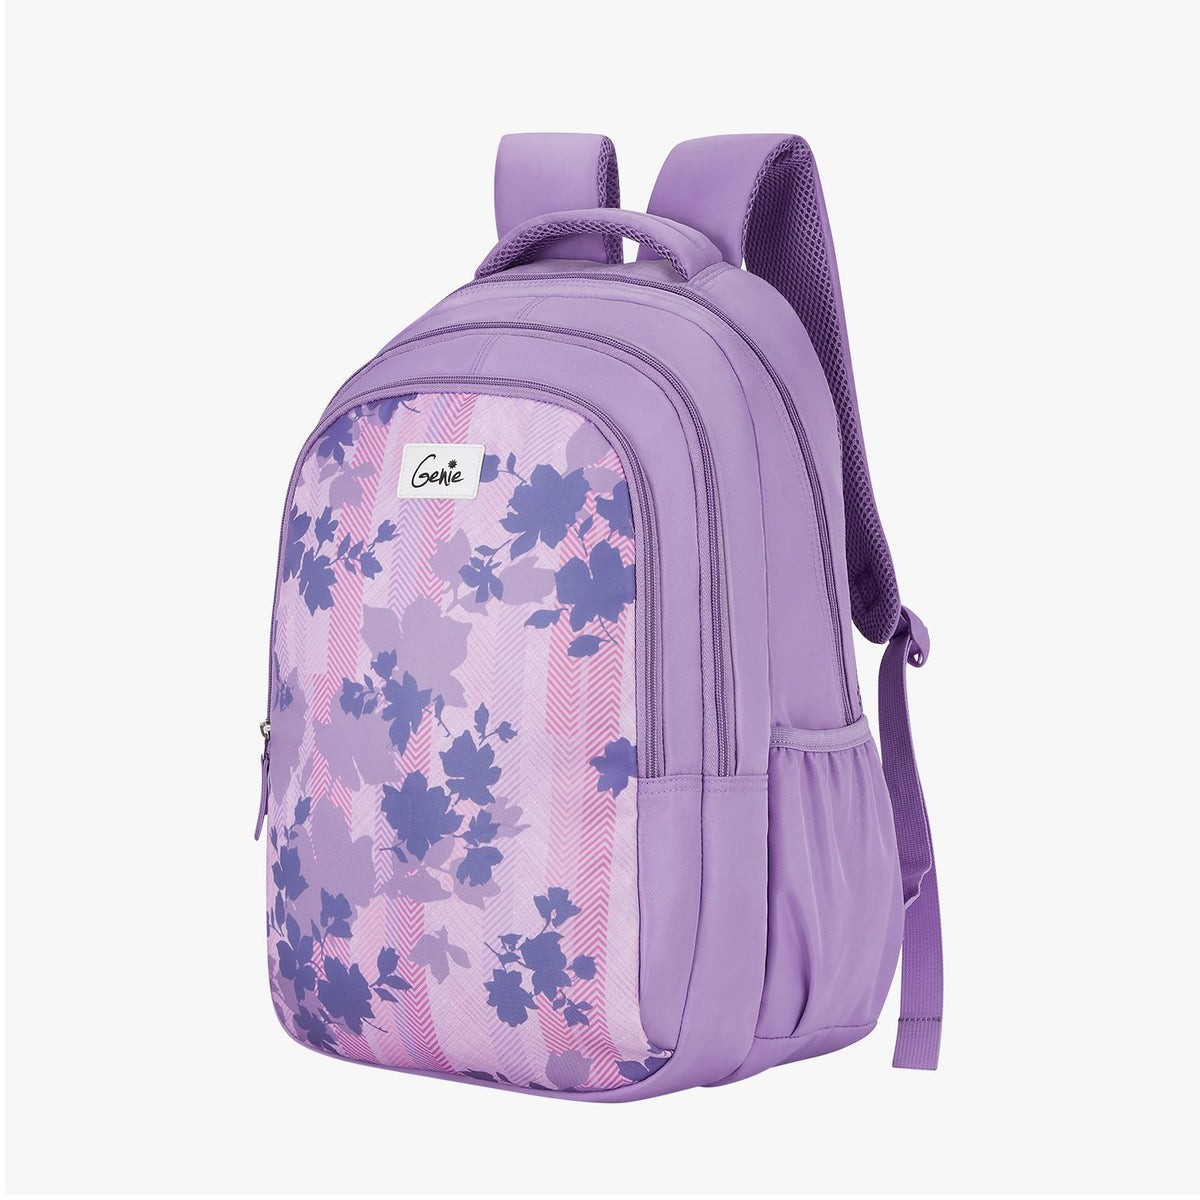 Kawaii White Waterproof Backpacks For School For College Students Cute And Stylish  School Bag For Women And Teens 24716190 From Mvdm, $26.6 | DHgate.Com